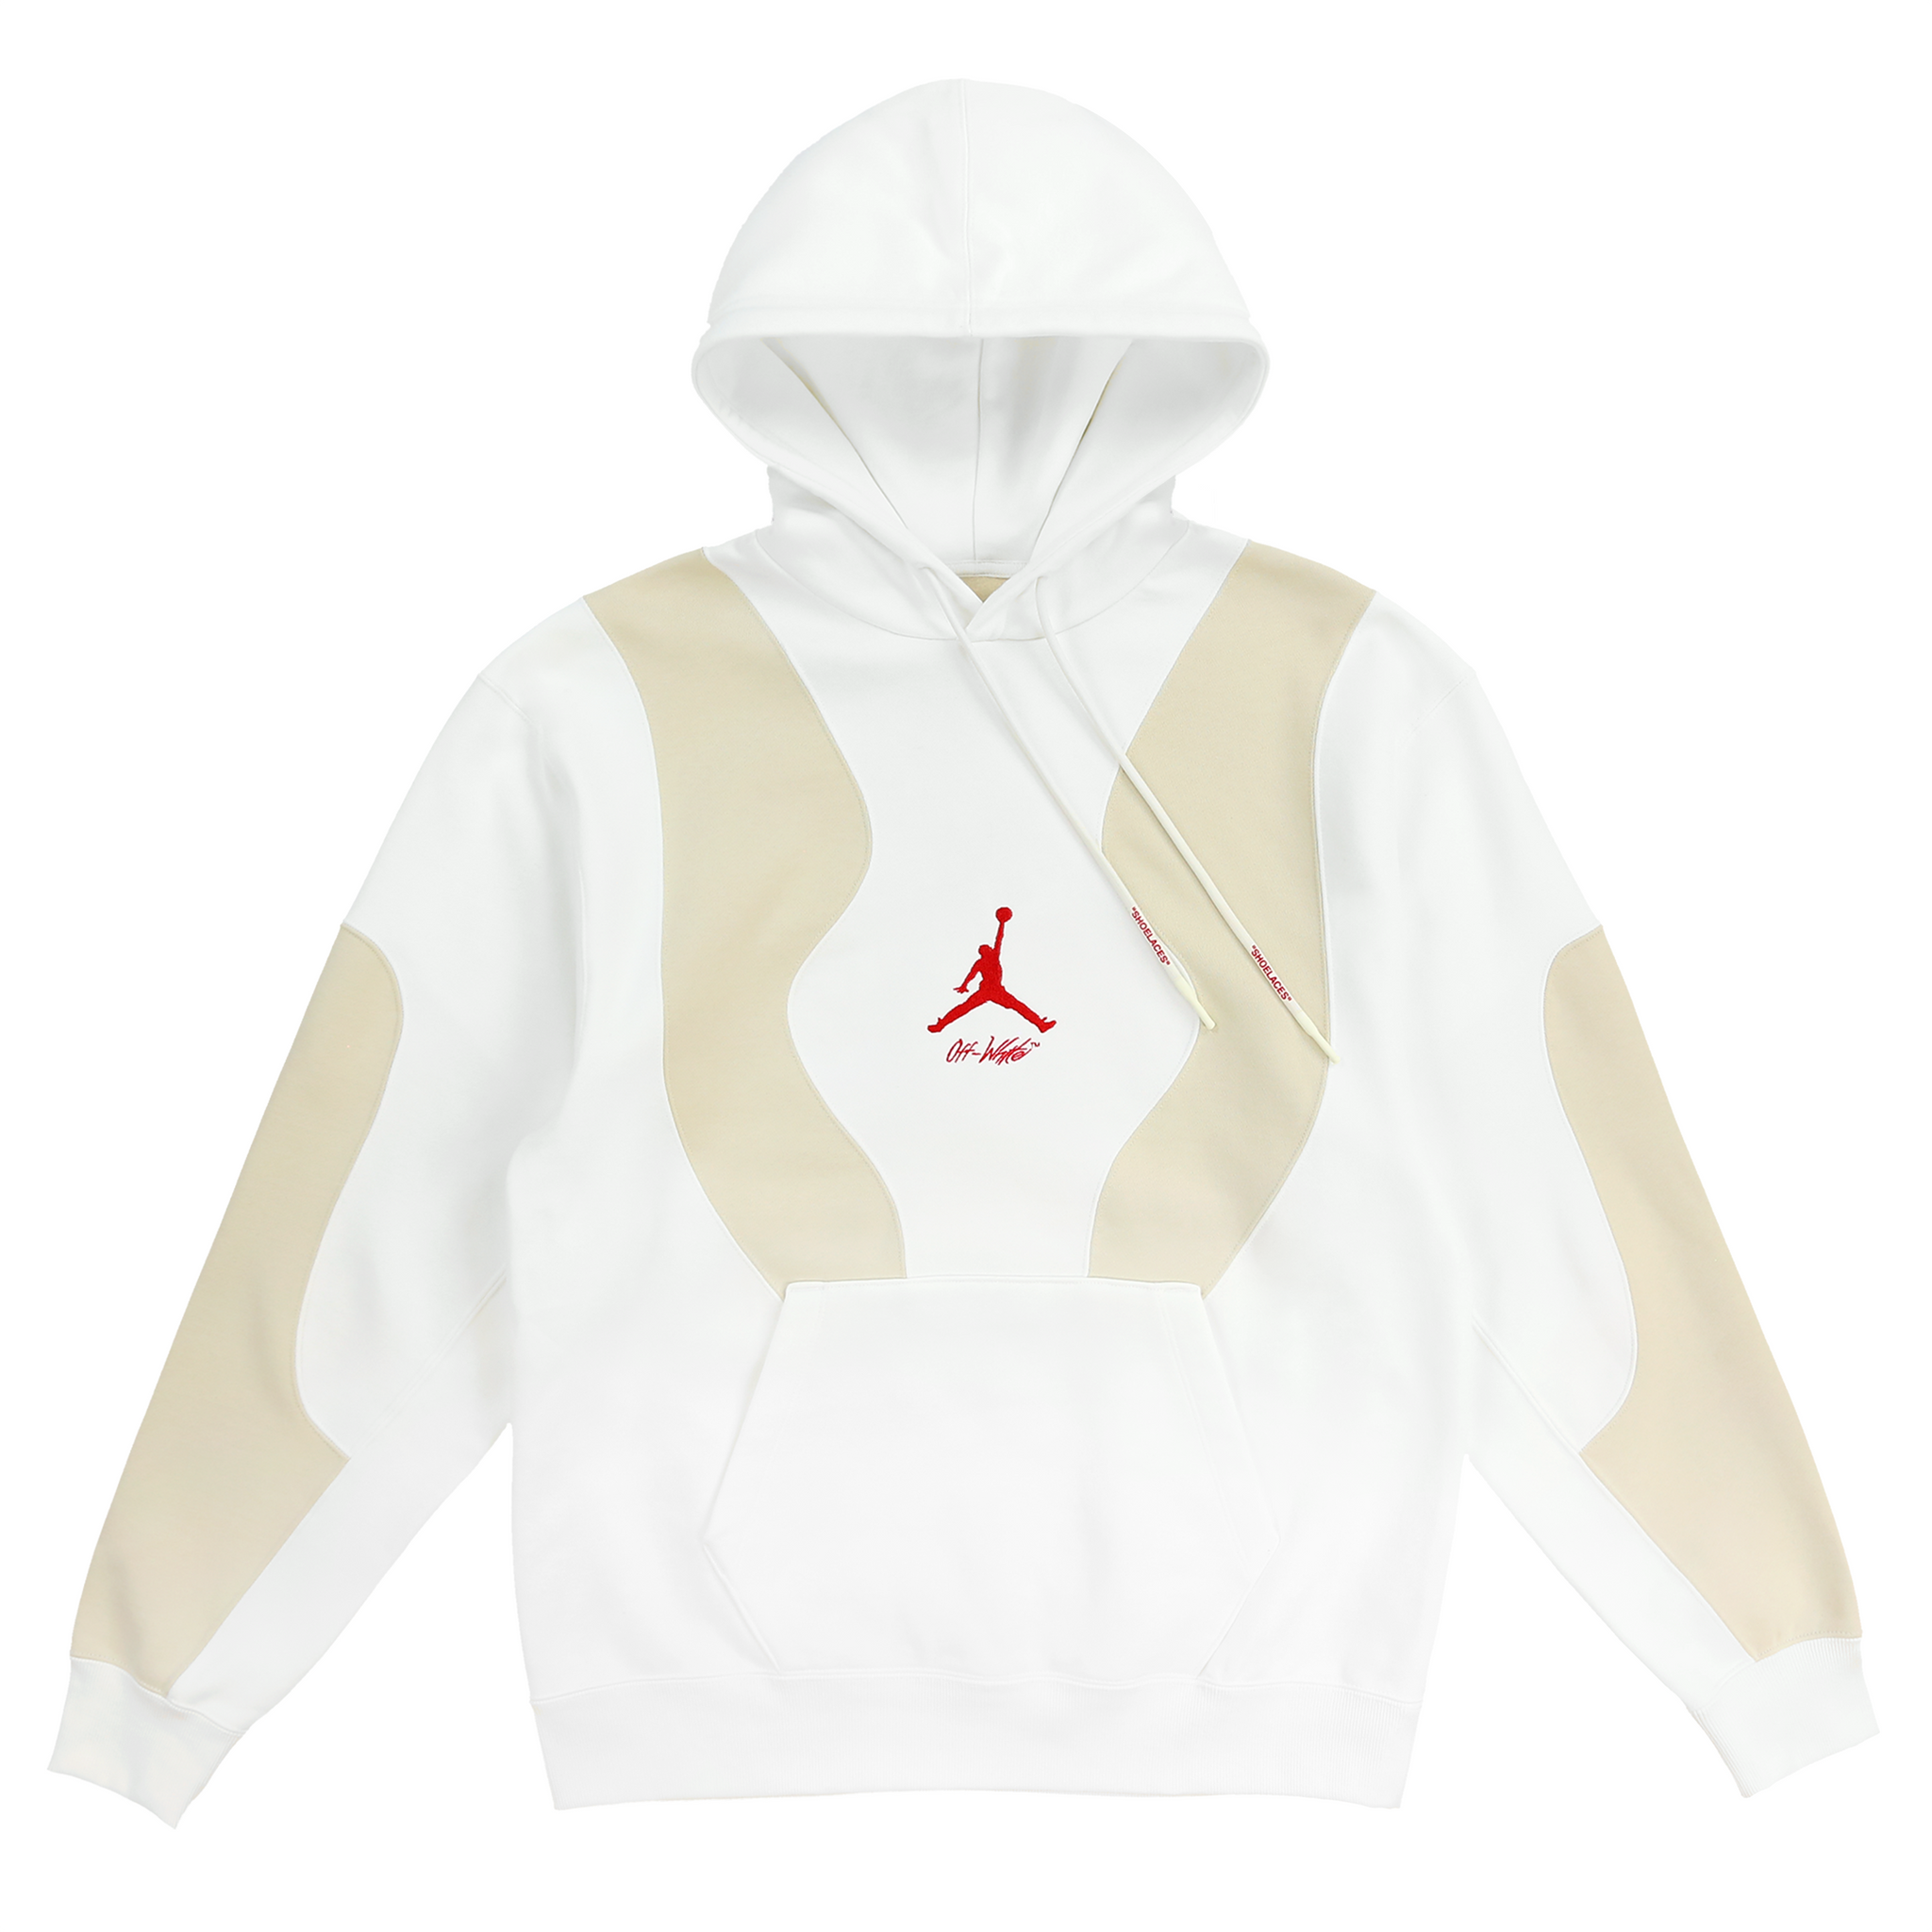 Jordan x Off-White™ Hoodie (Fossil/Sail/University Red) – Canary Yellow